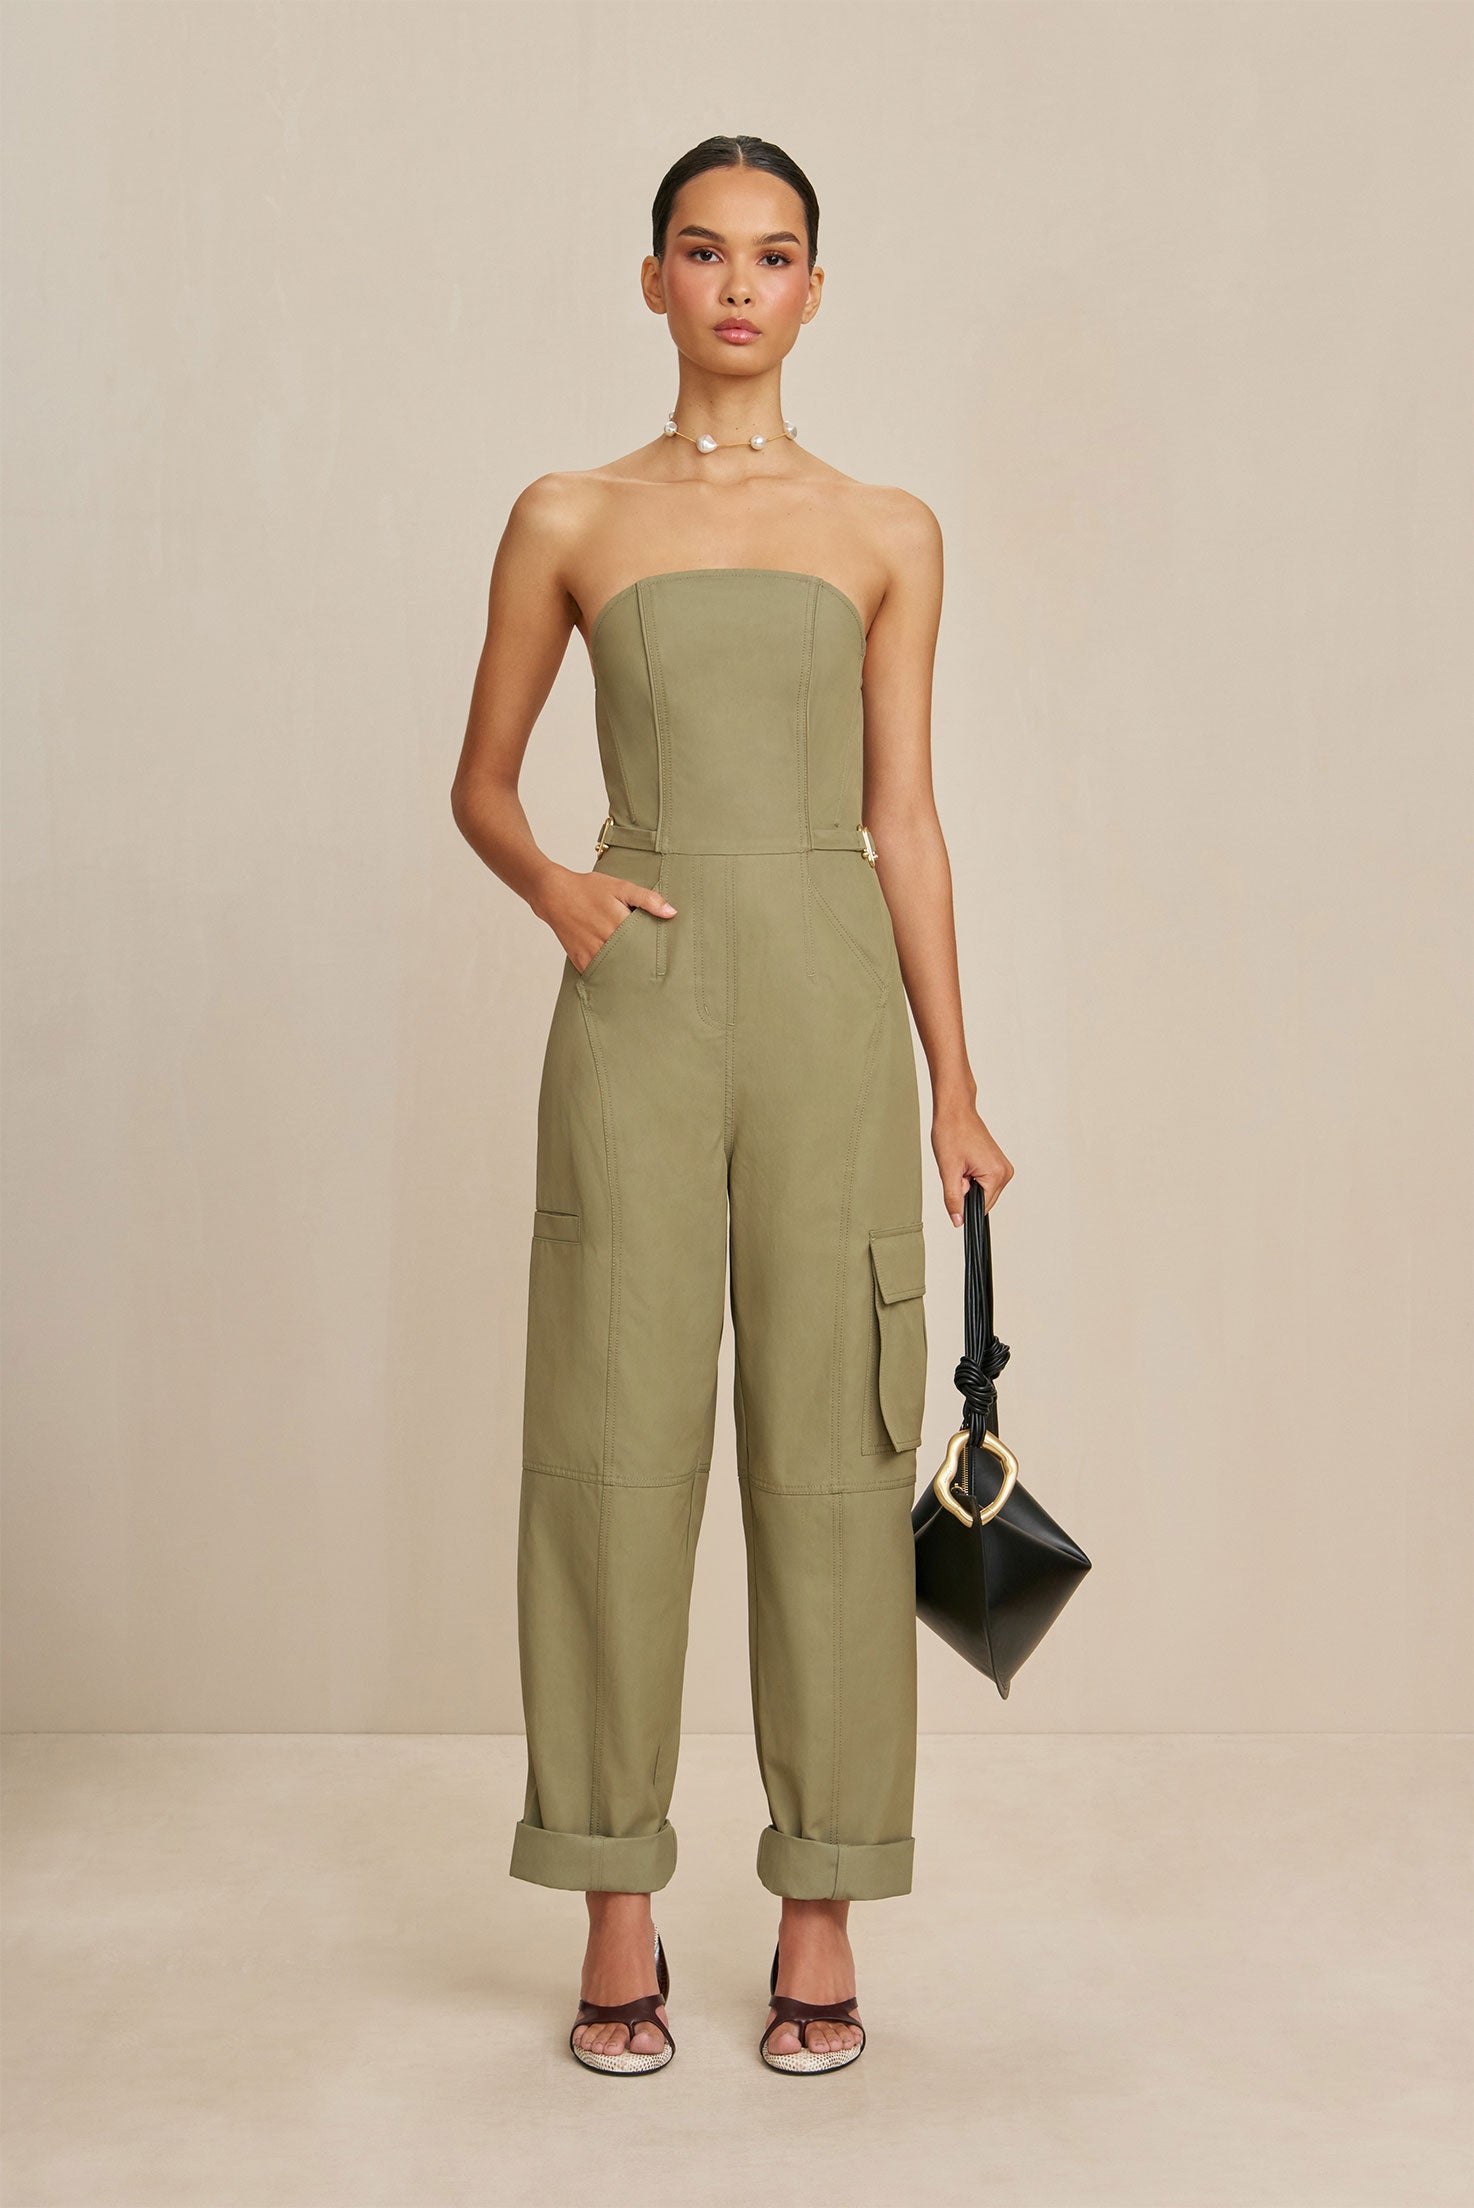 310 Jumpsuits ideas  fashion, african fashion, style